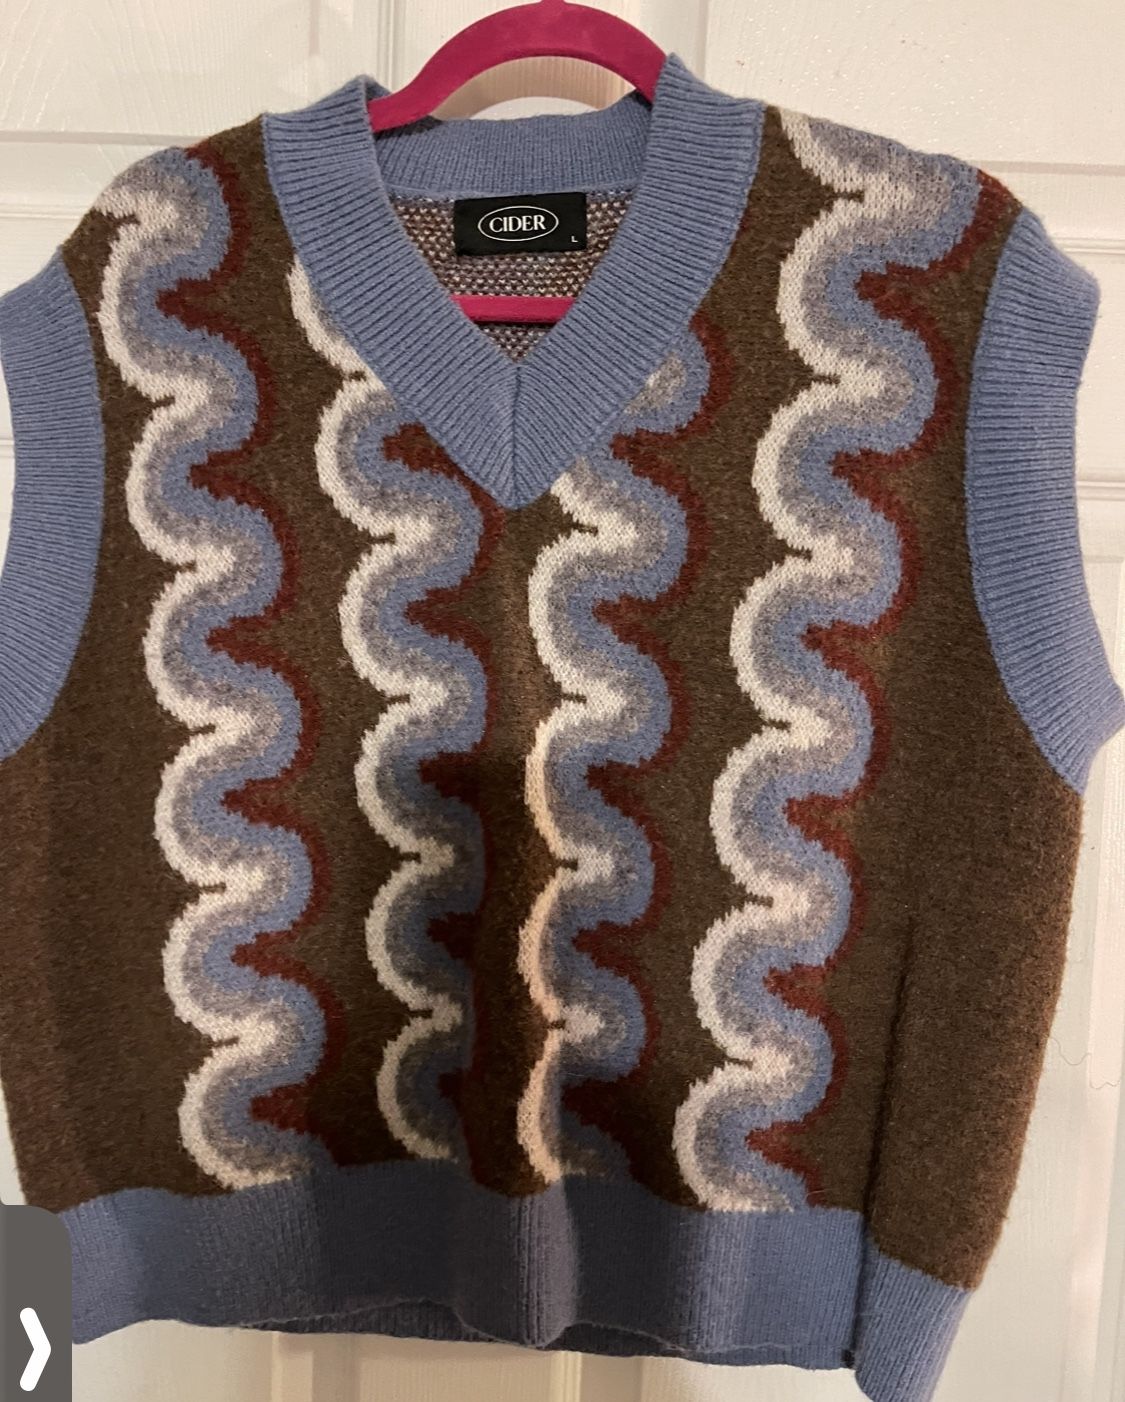 Retro Wavy Sweater Vest by Cider like new and smoke free  Size large 